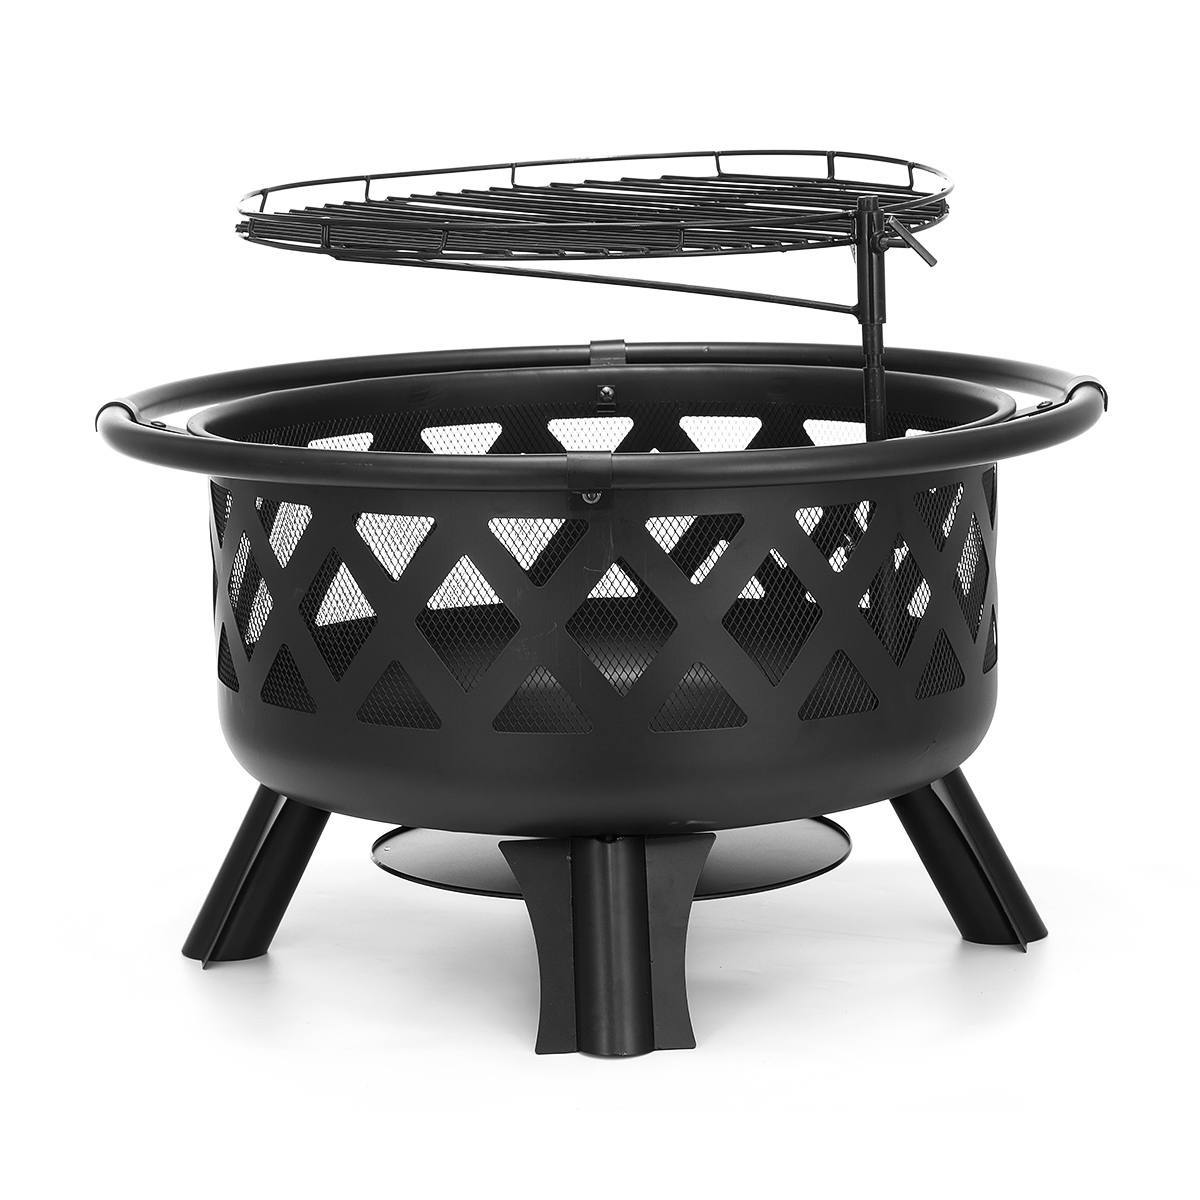 30inch Outdoor Fire Pit Heavy Duty Wood Burning Stove Cooking BBQ Grill Outdoor Graden Backyard Bonfire Patio